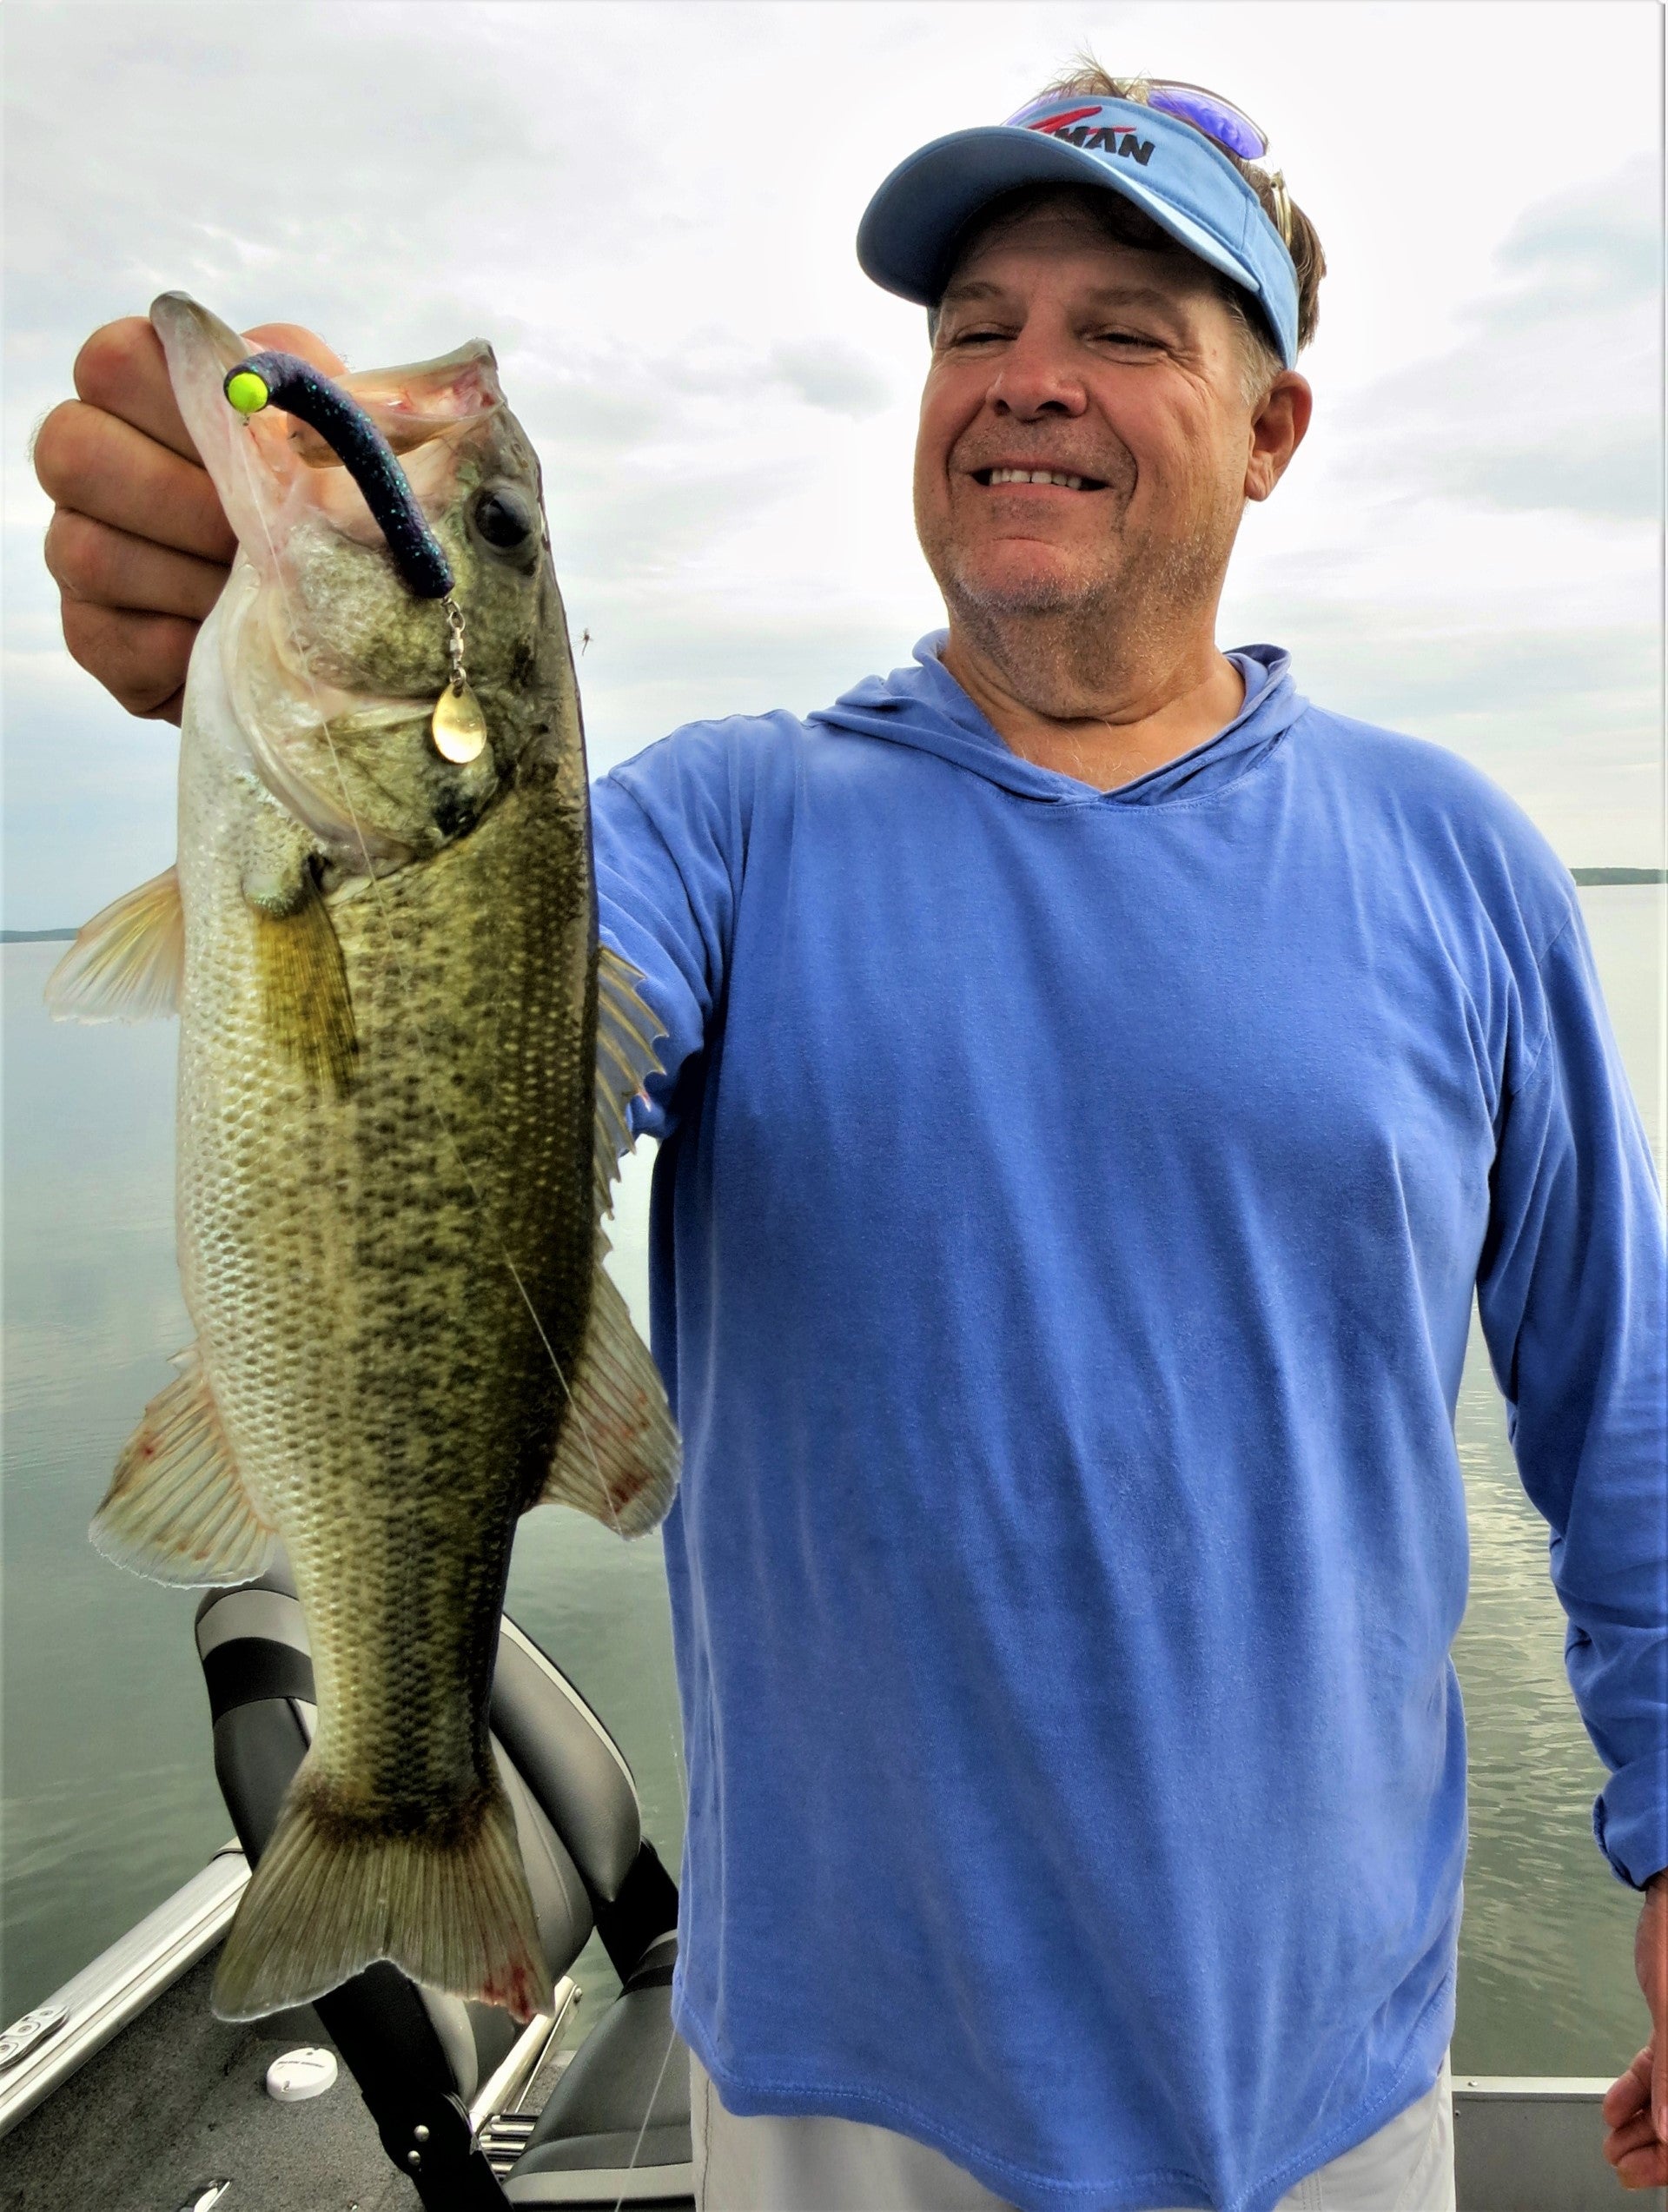 Bear Brundette with a Large Mouth Bass